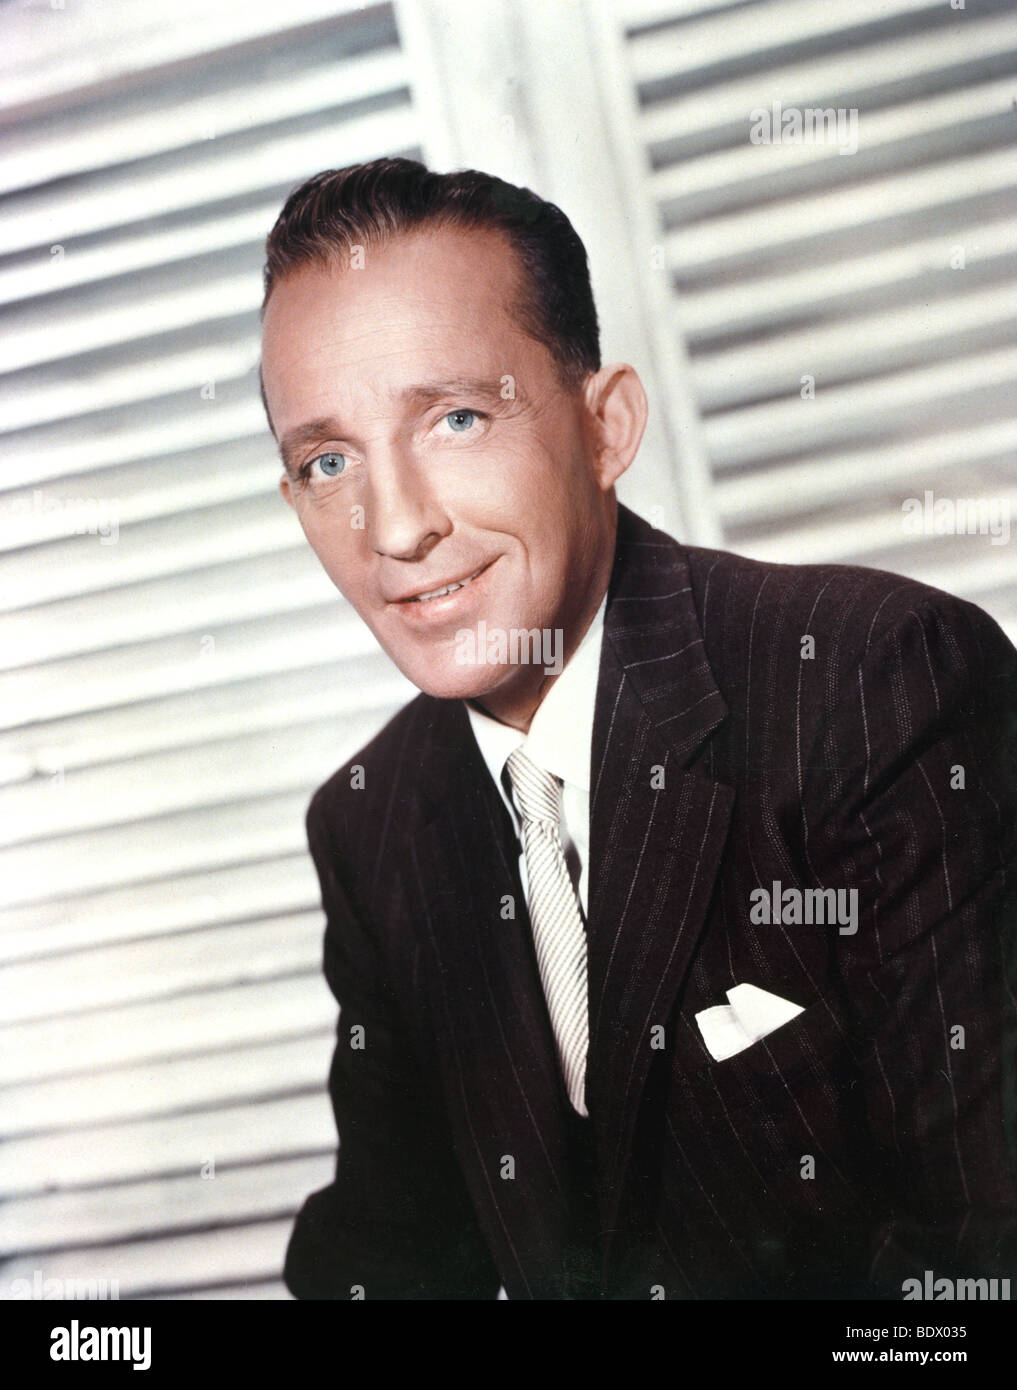 BING CROSBY - US singer and actor Stock Photo